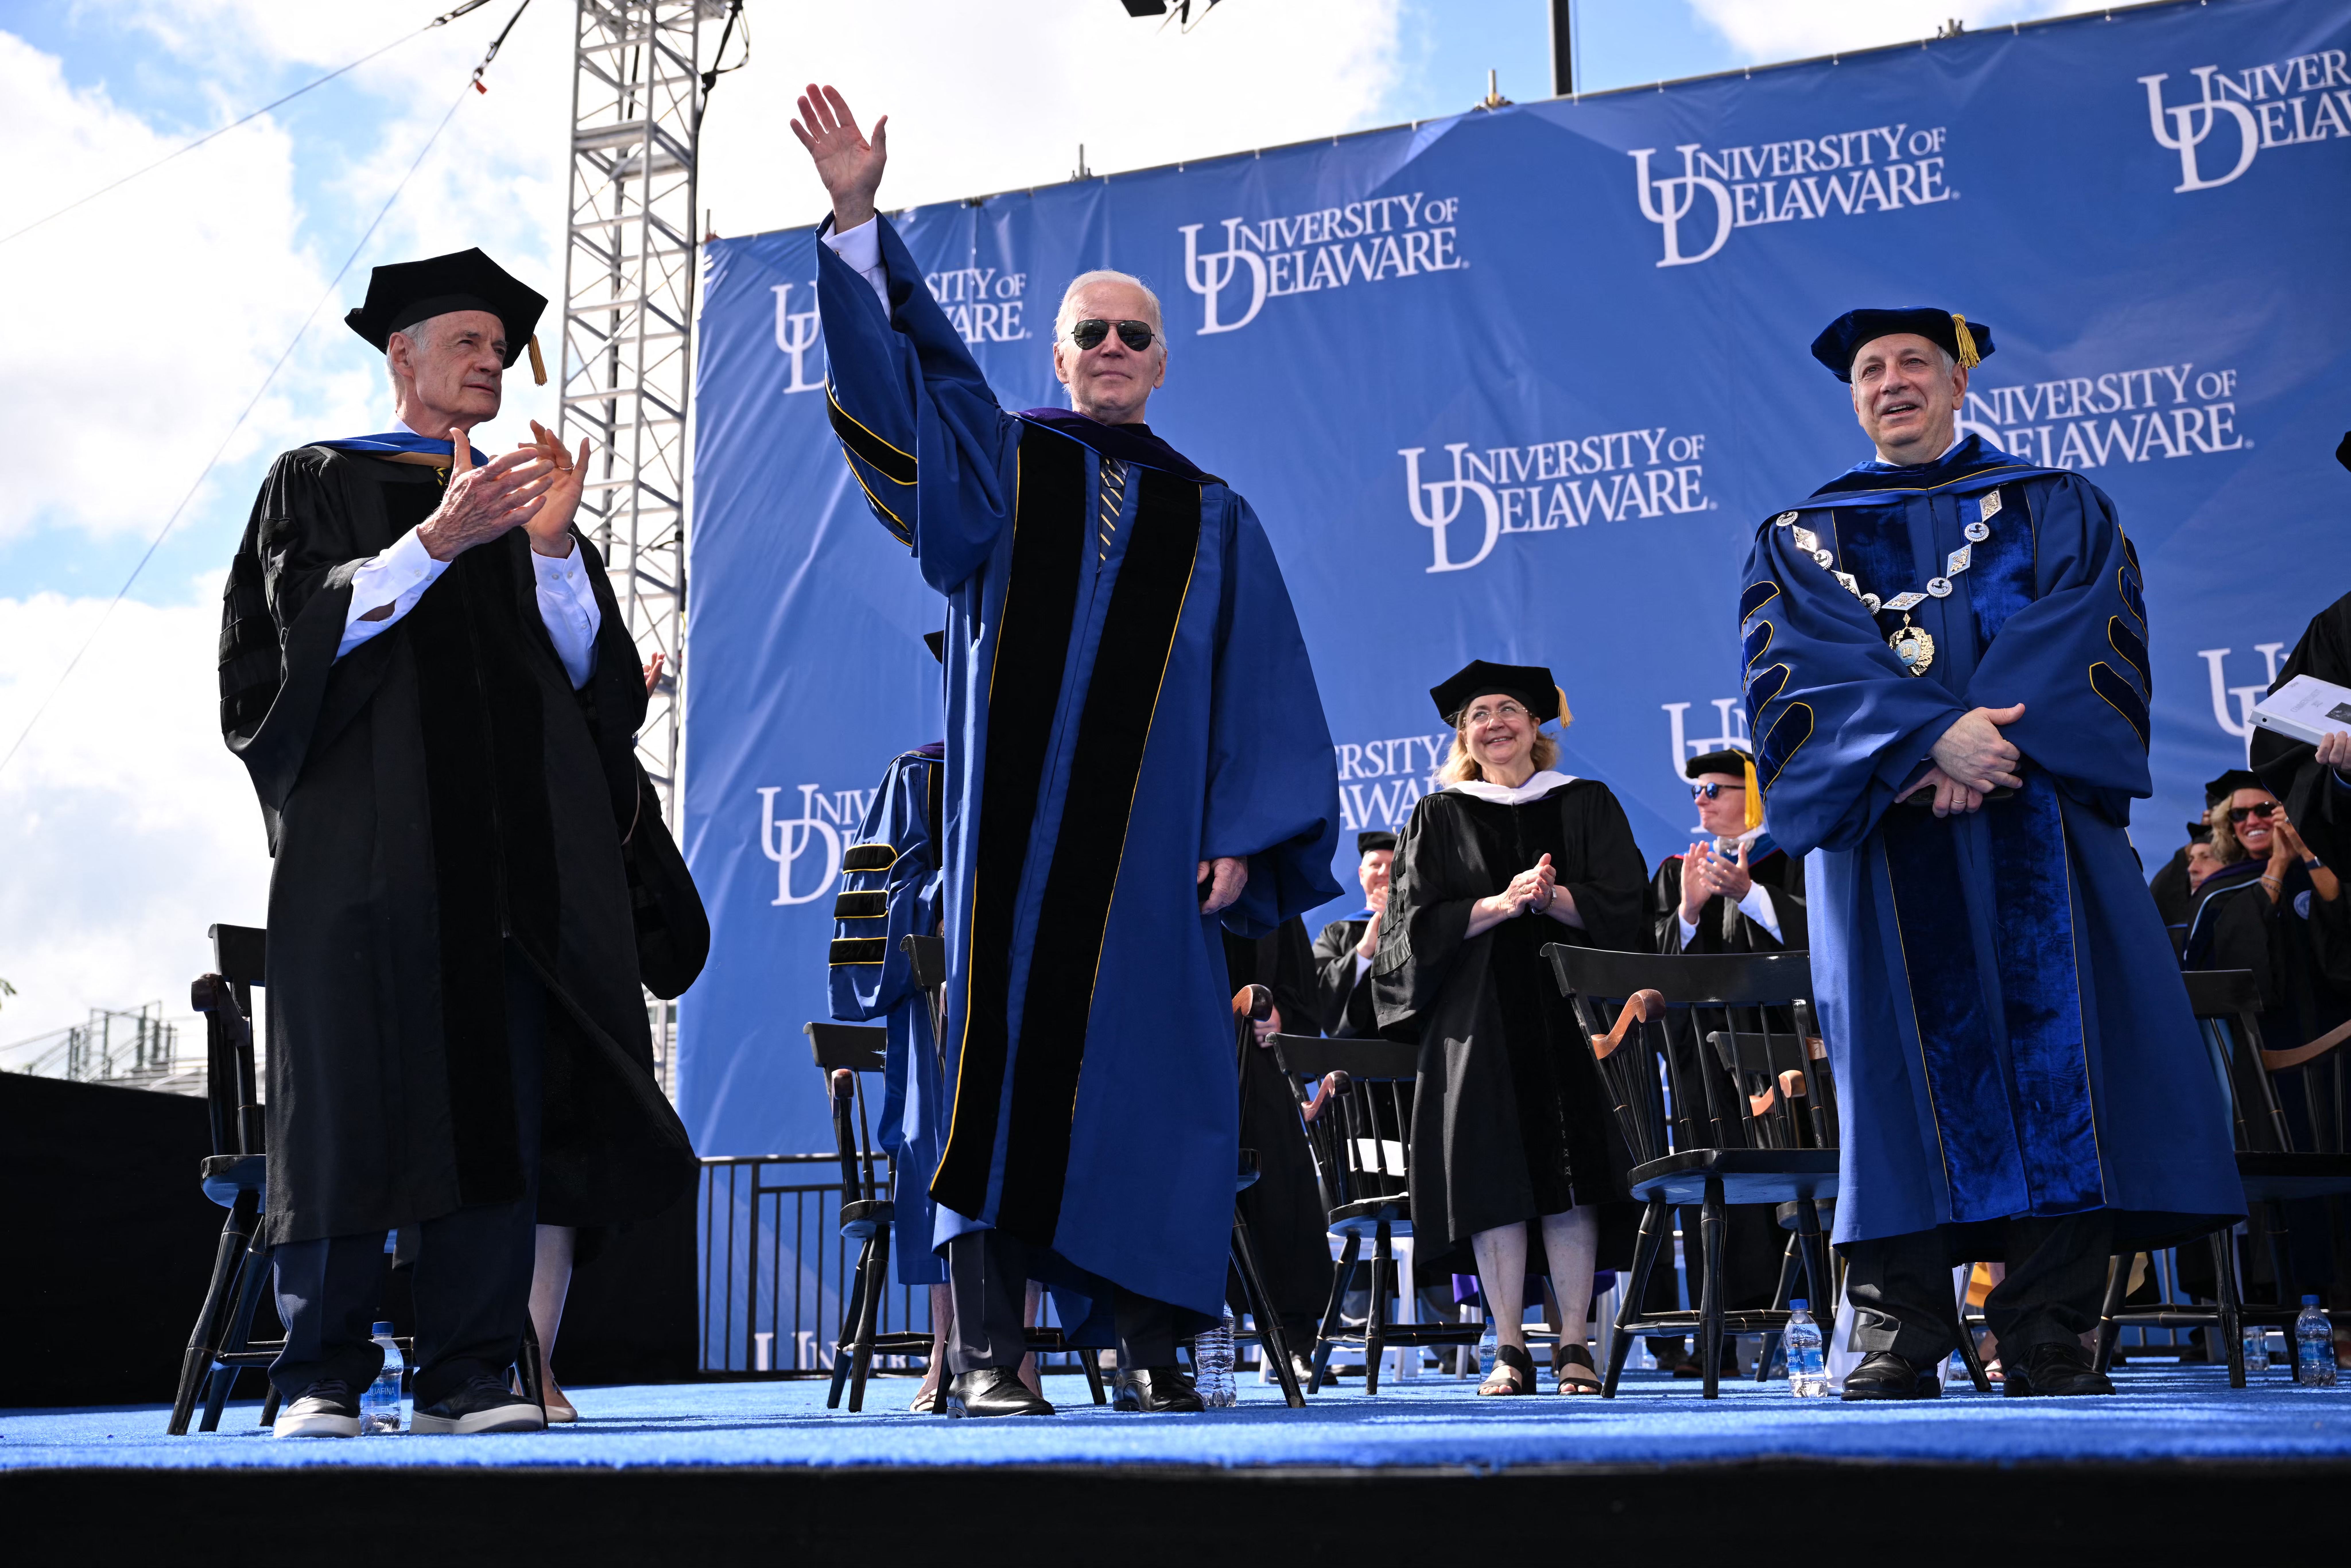 US President Joe Biden, with with University of Delaware President Dennis Assanis (R) and Senator Tom Carper (L), attends the graduation ceremony for his alma mater, the University of Delaware, at Delaware Stadium, where he will deliver the commencement address, in Newark, Delaware, on May 28, 2022. 